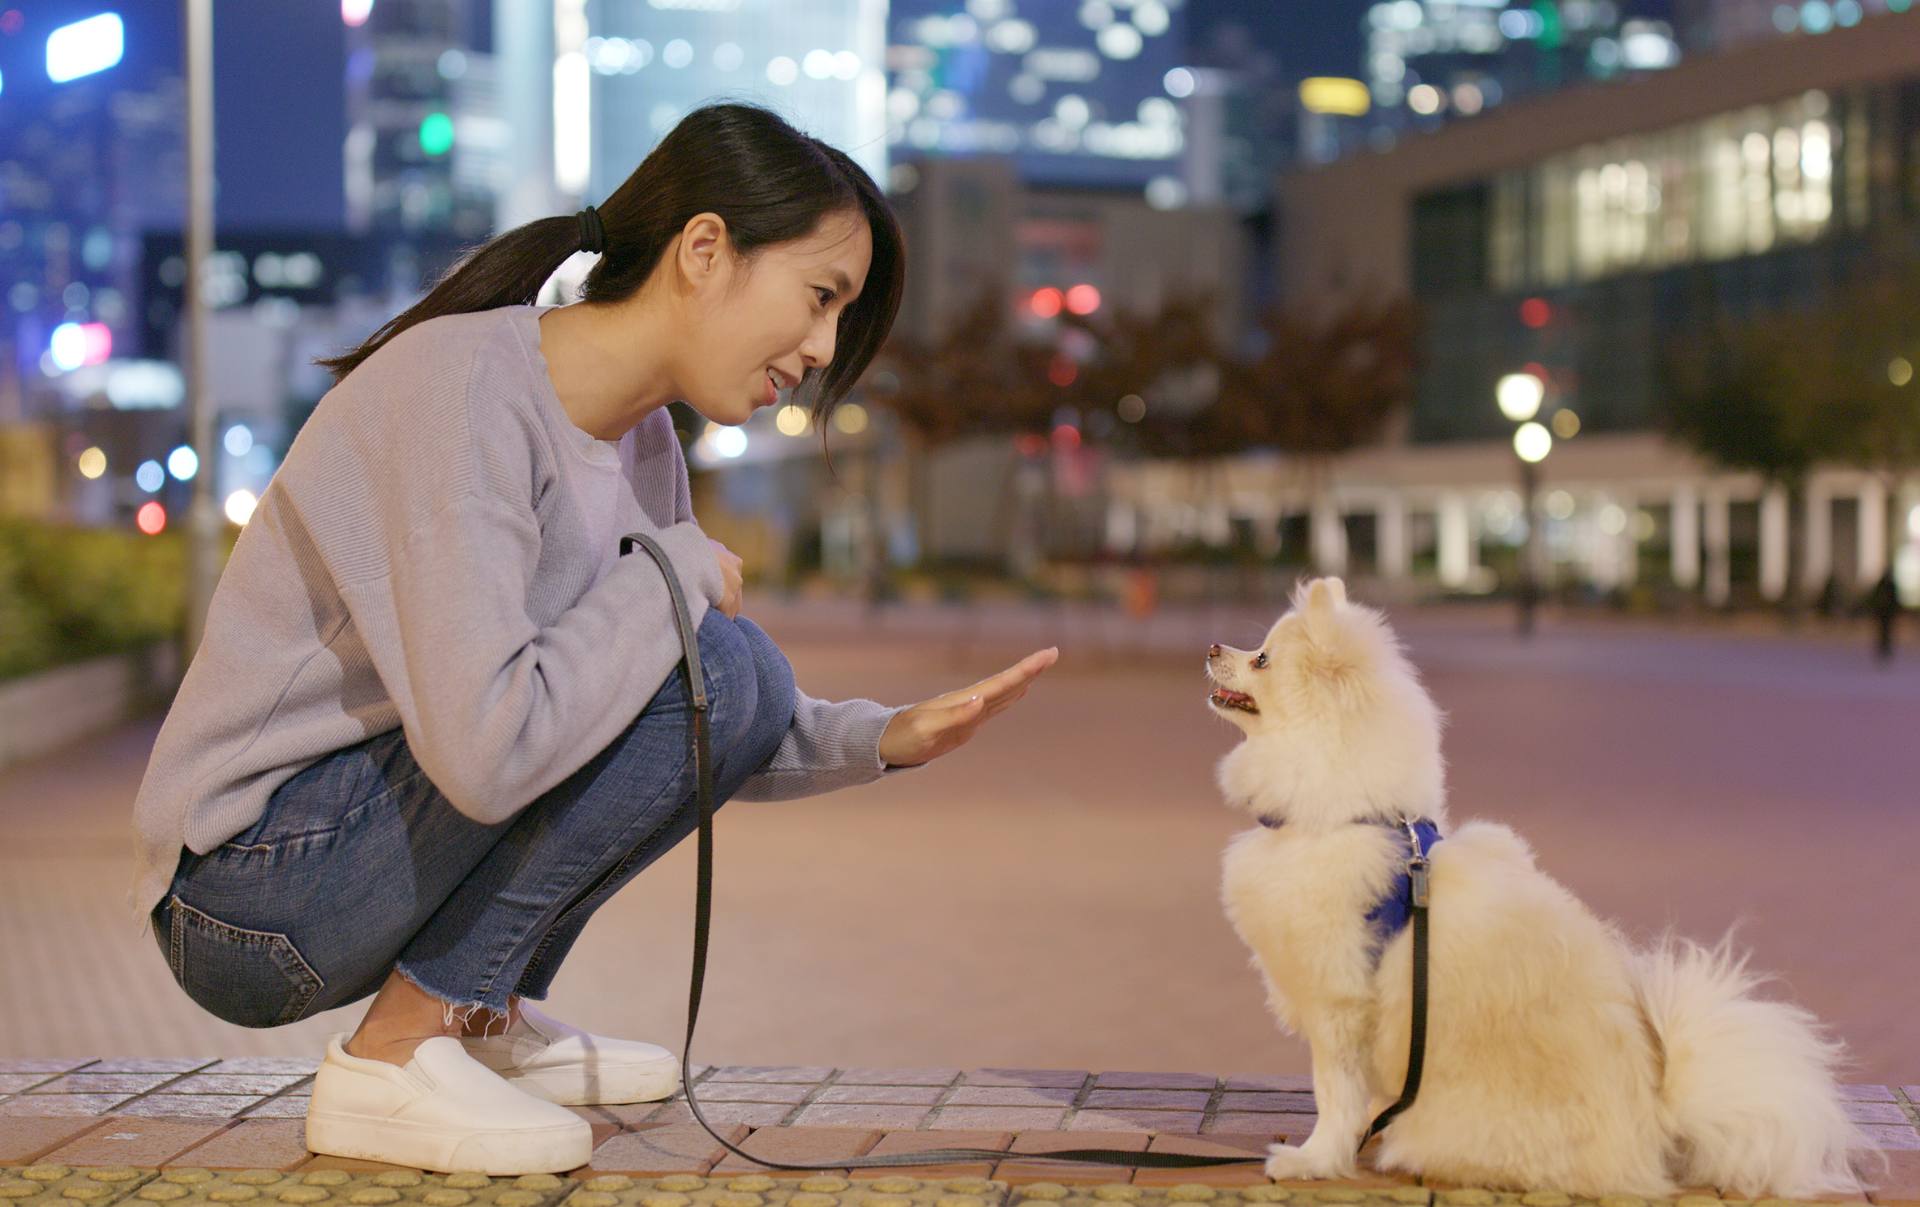 Woman kneeling and using "wait" hand signal for her small white dog on leash. City backdrop at night.